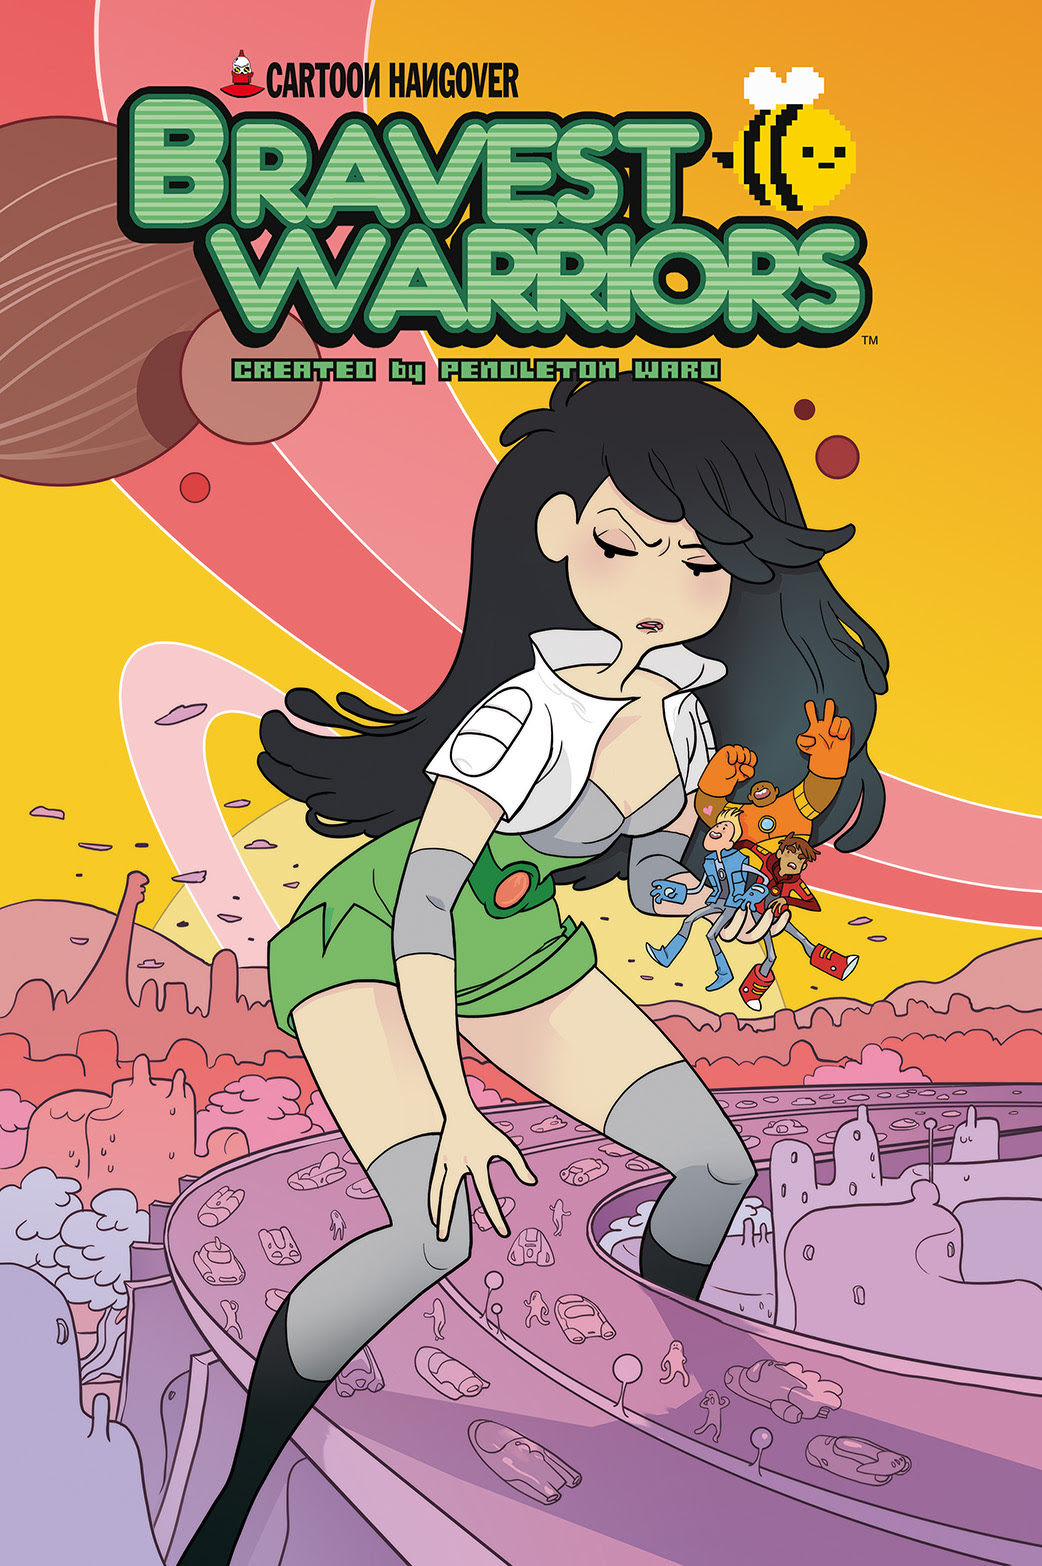 BRAVEST WARRIORS #21 Cover A by Mady Martin